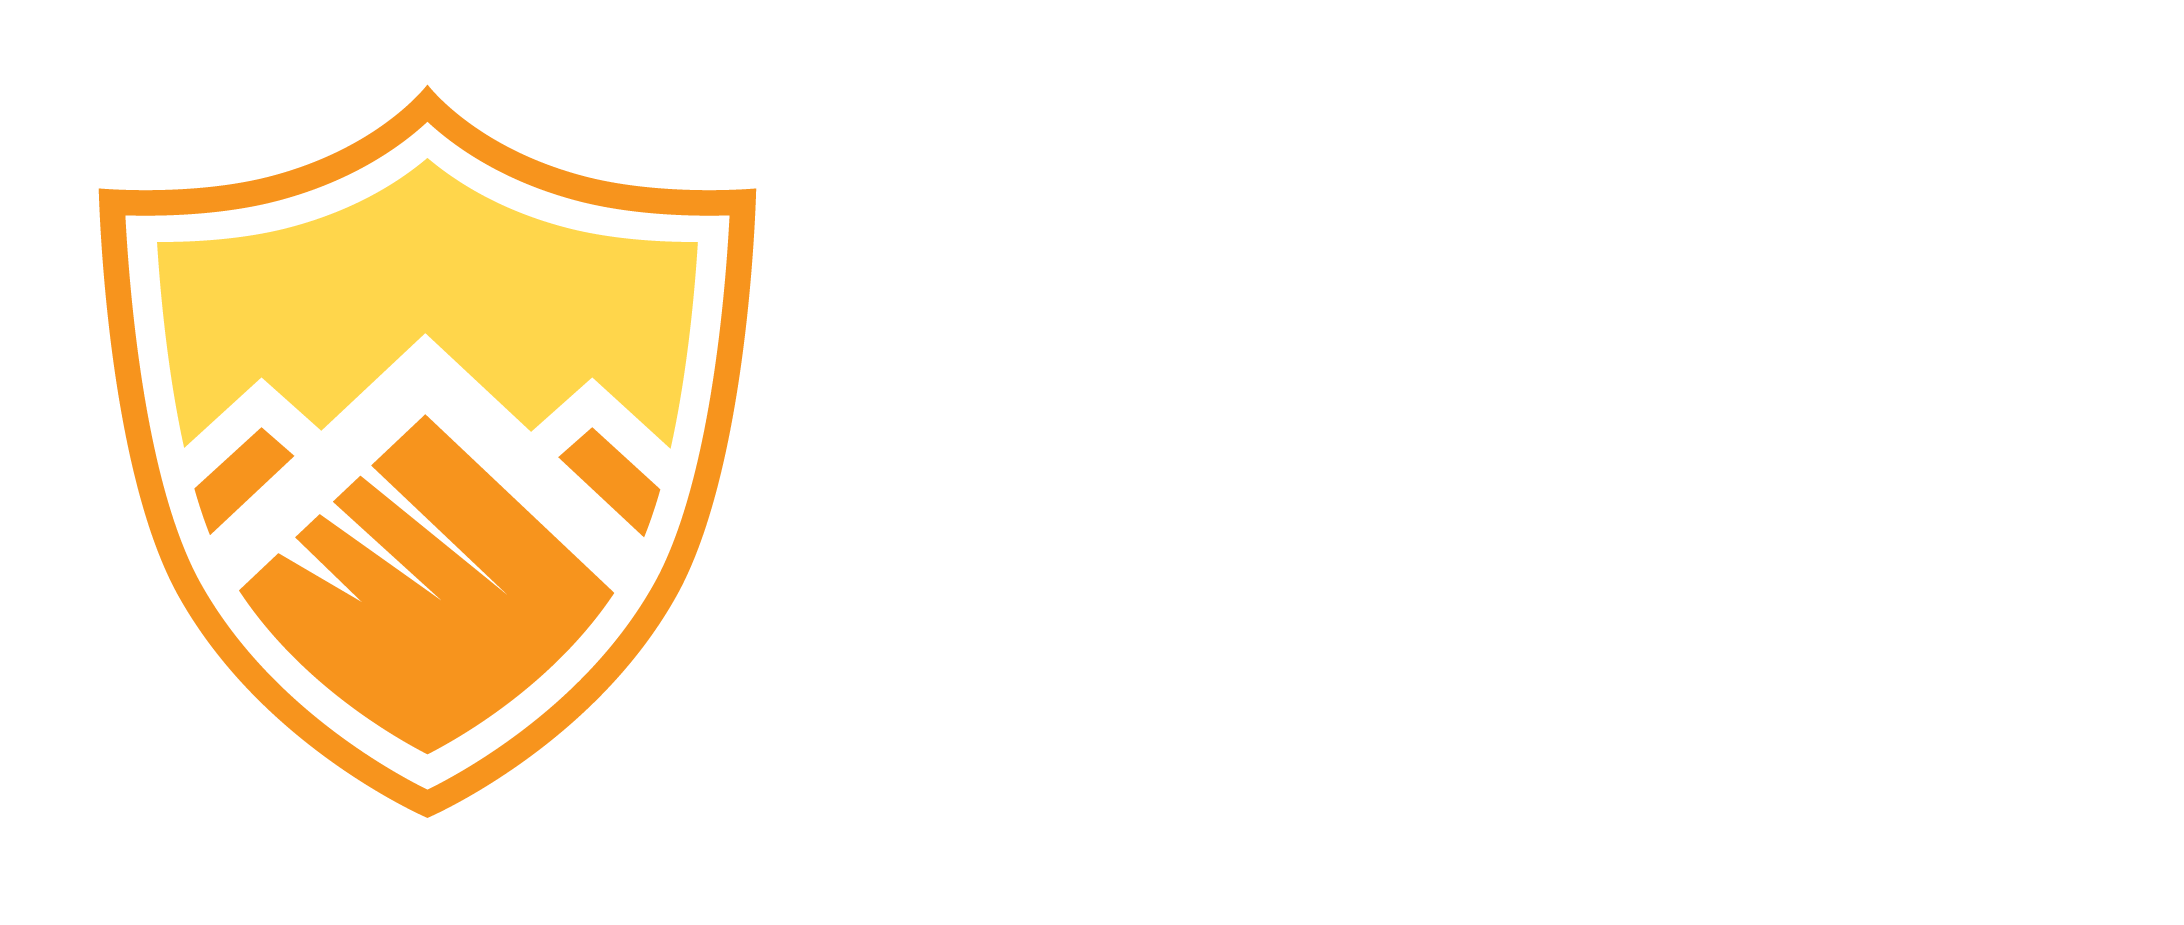 The Safety Sherpa